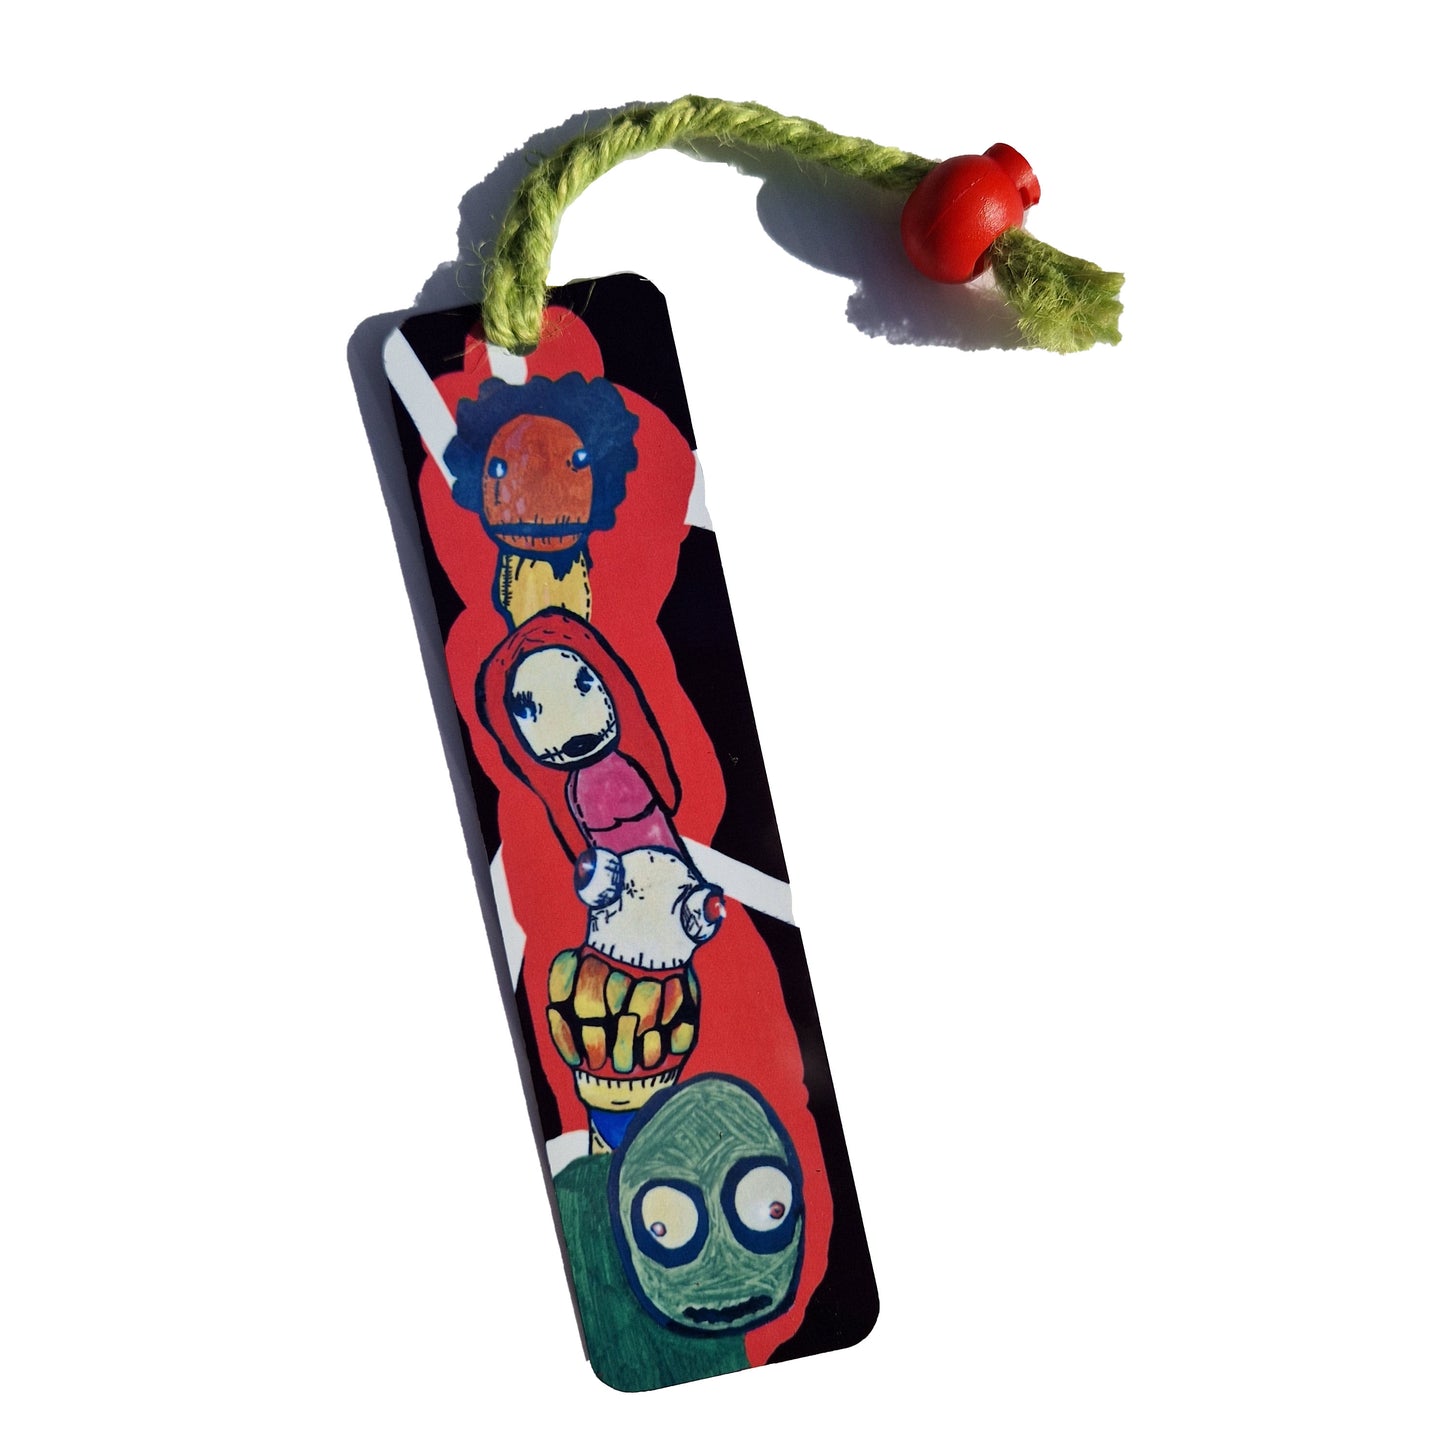 salad fingers friends hand painted print unique bookmarks as gifts 